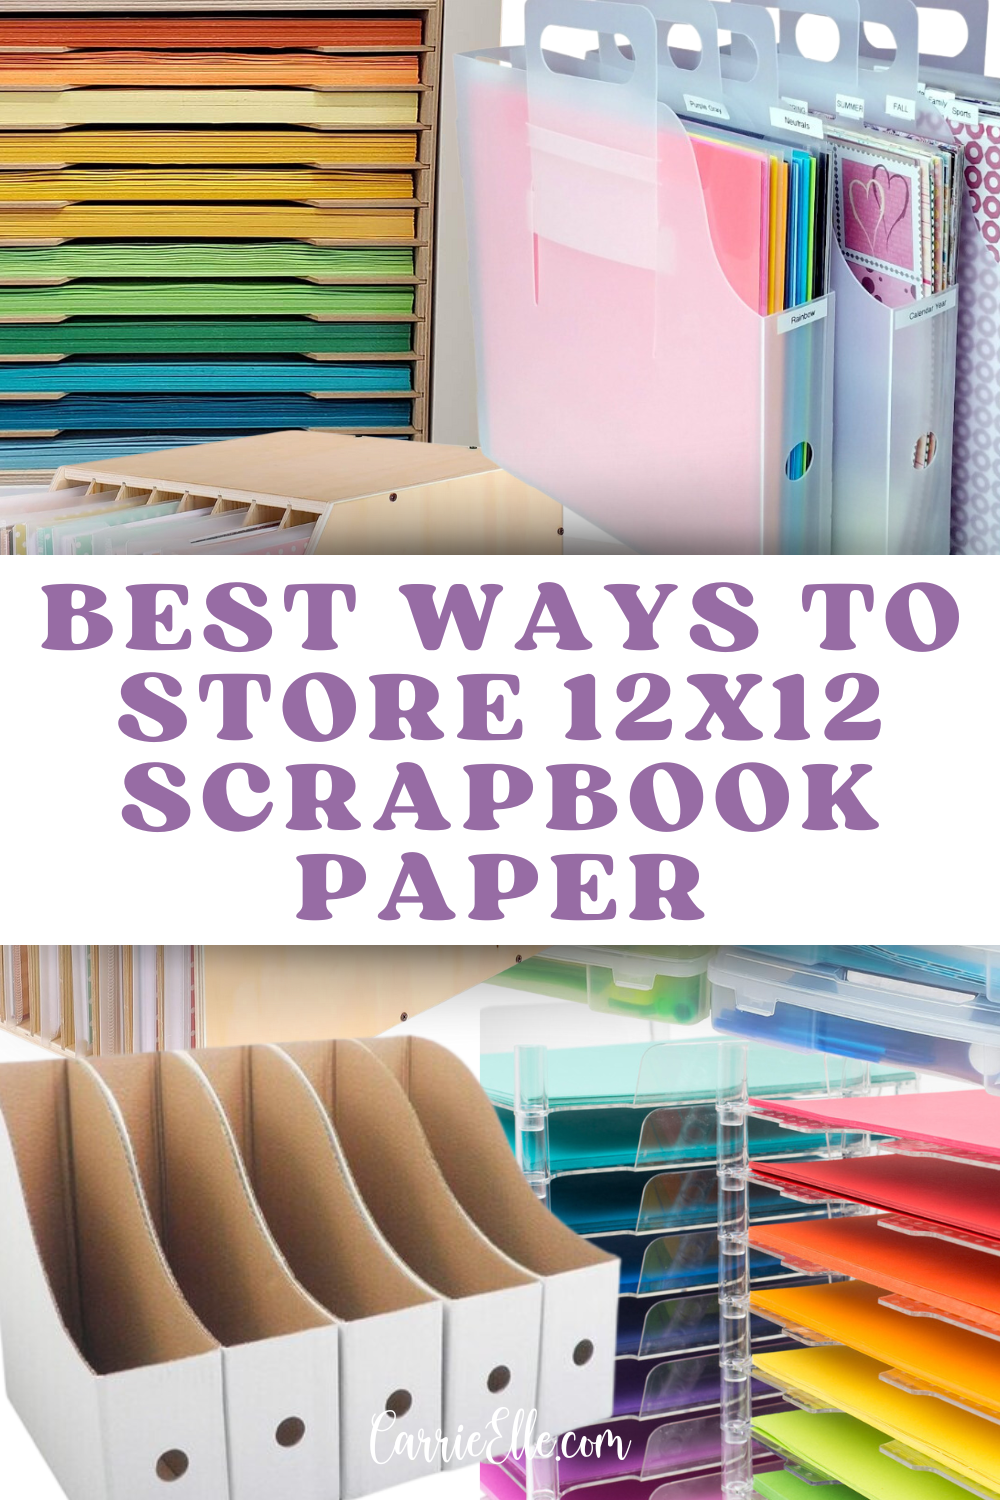 How to Make a Book from Scrapbook Paper  Book making, 12x12 scrapbook  paper, Scrapbook paper projects